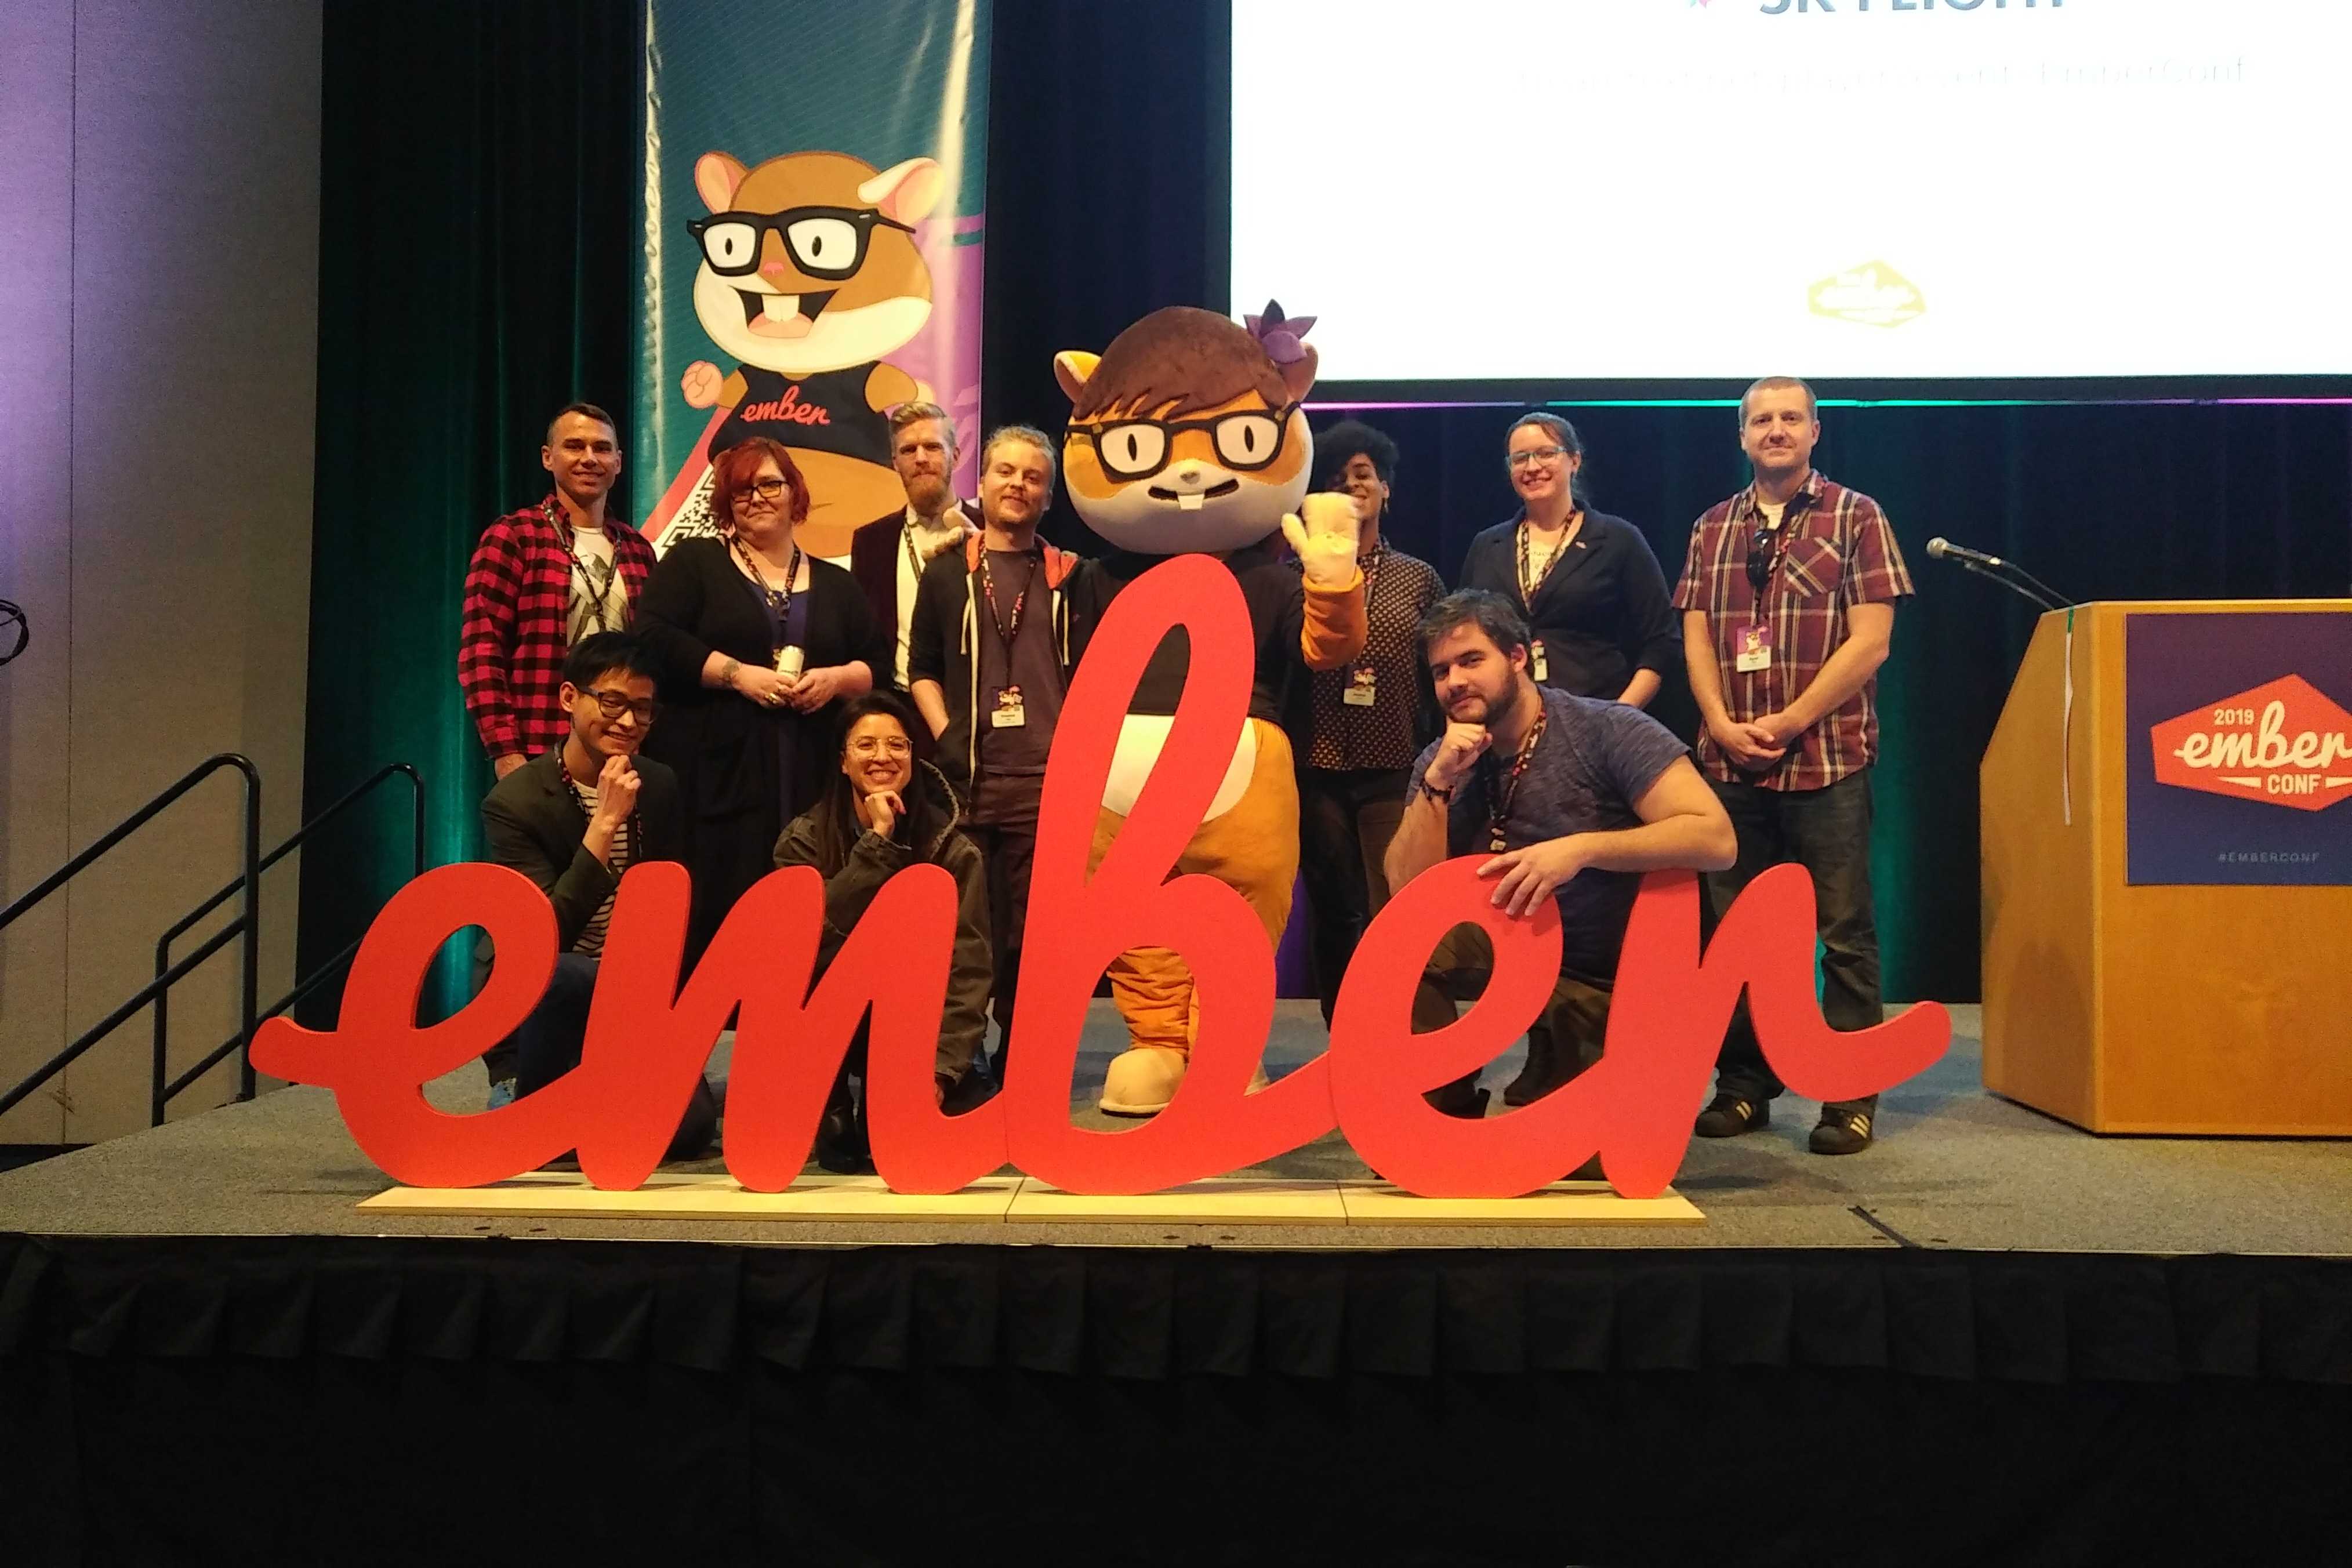 The Ember Times Team 2019 and the Zoey mascot posing on stage behind the Ember logo and looking cool as ever 😎